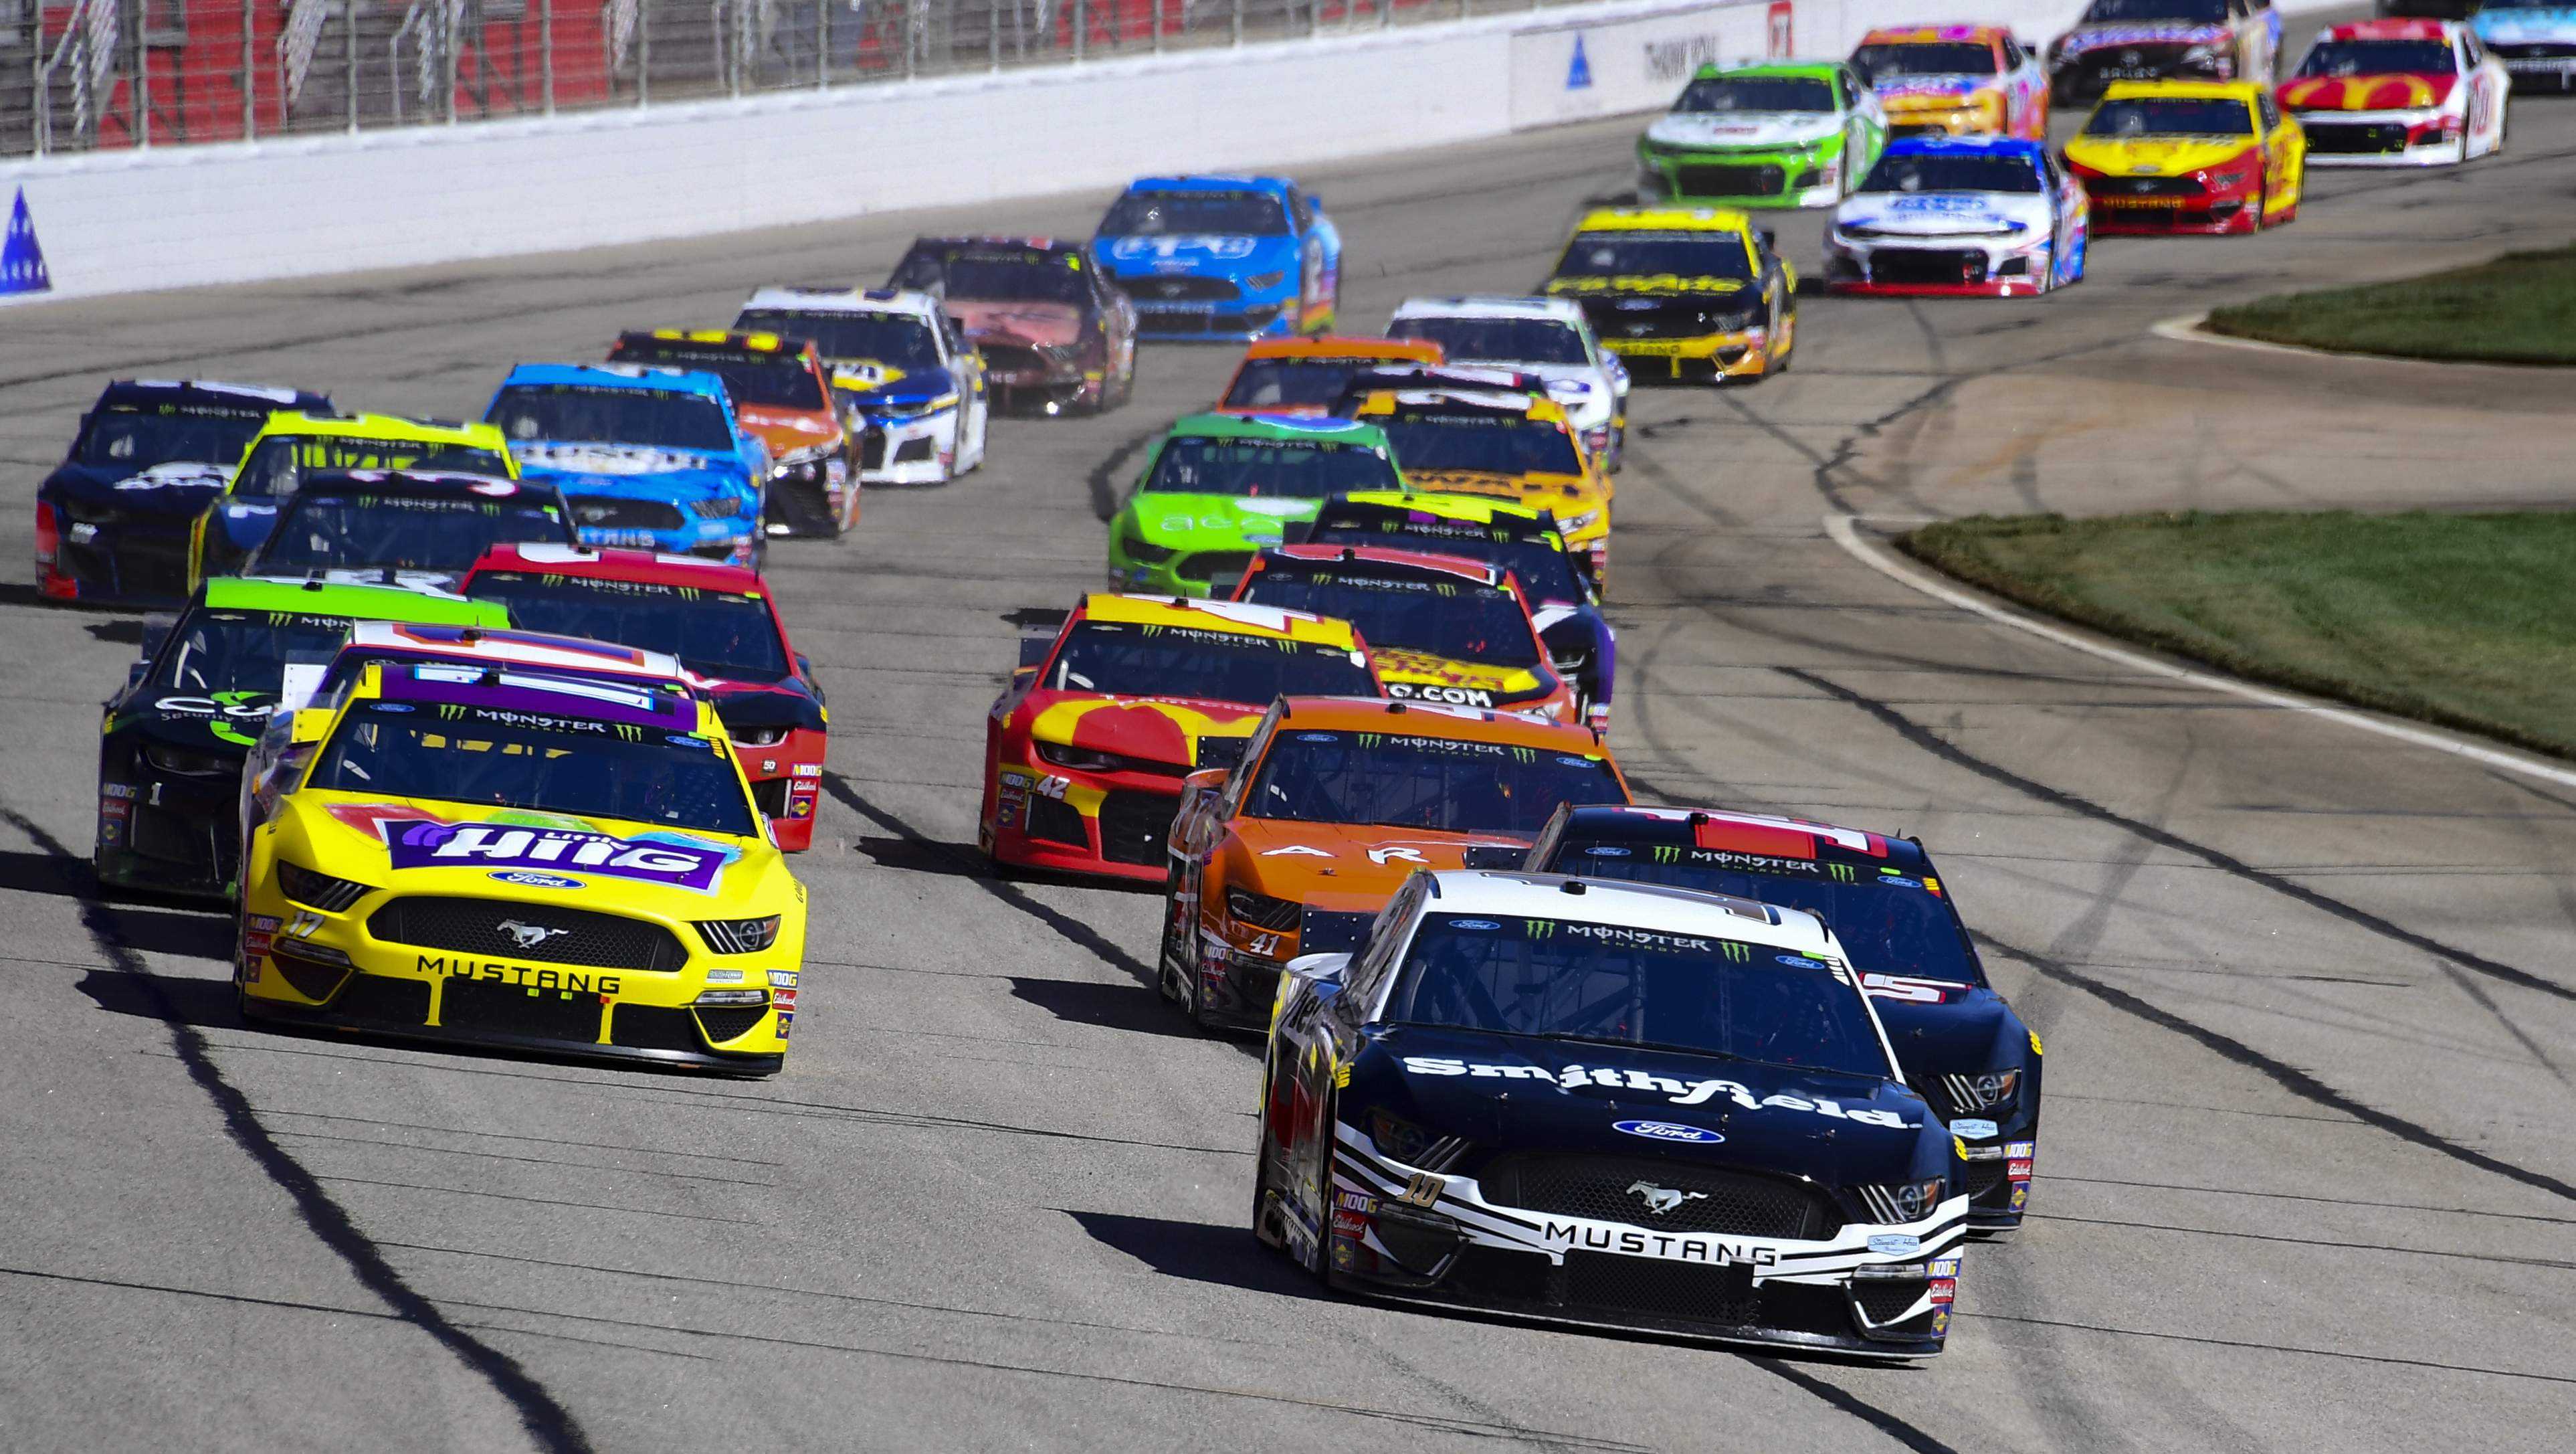  The 2019 NASCAR season: Heading in the right direction